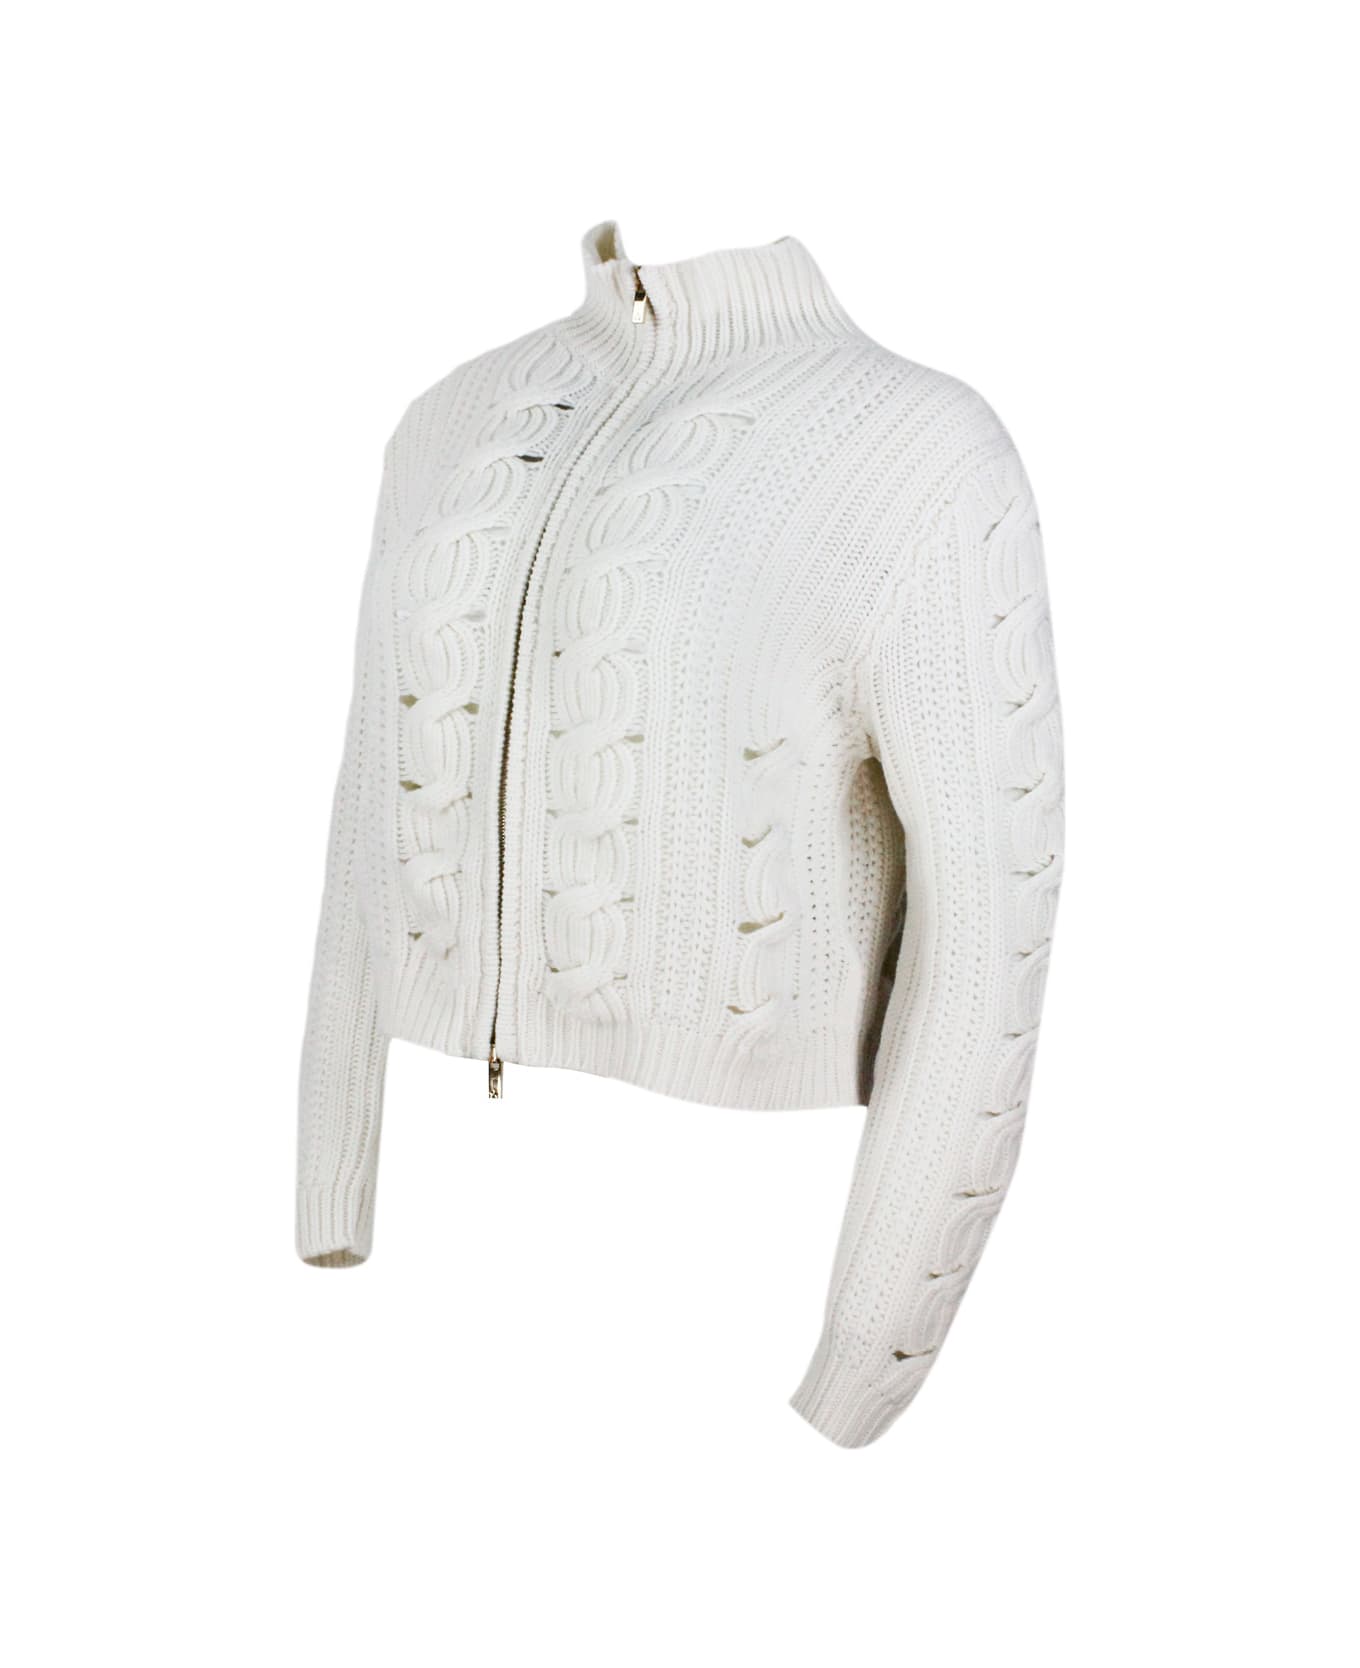 Lorena Antoniazzi Full Zip Turtleneck Sweater Made Of Soft Wool, Cashmere And Silk With Cable Knit - White